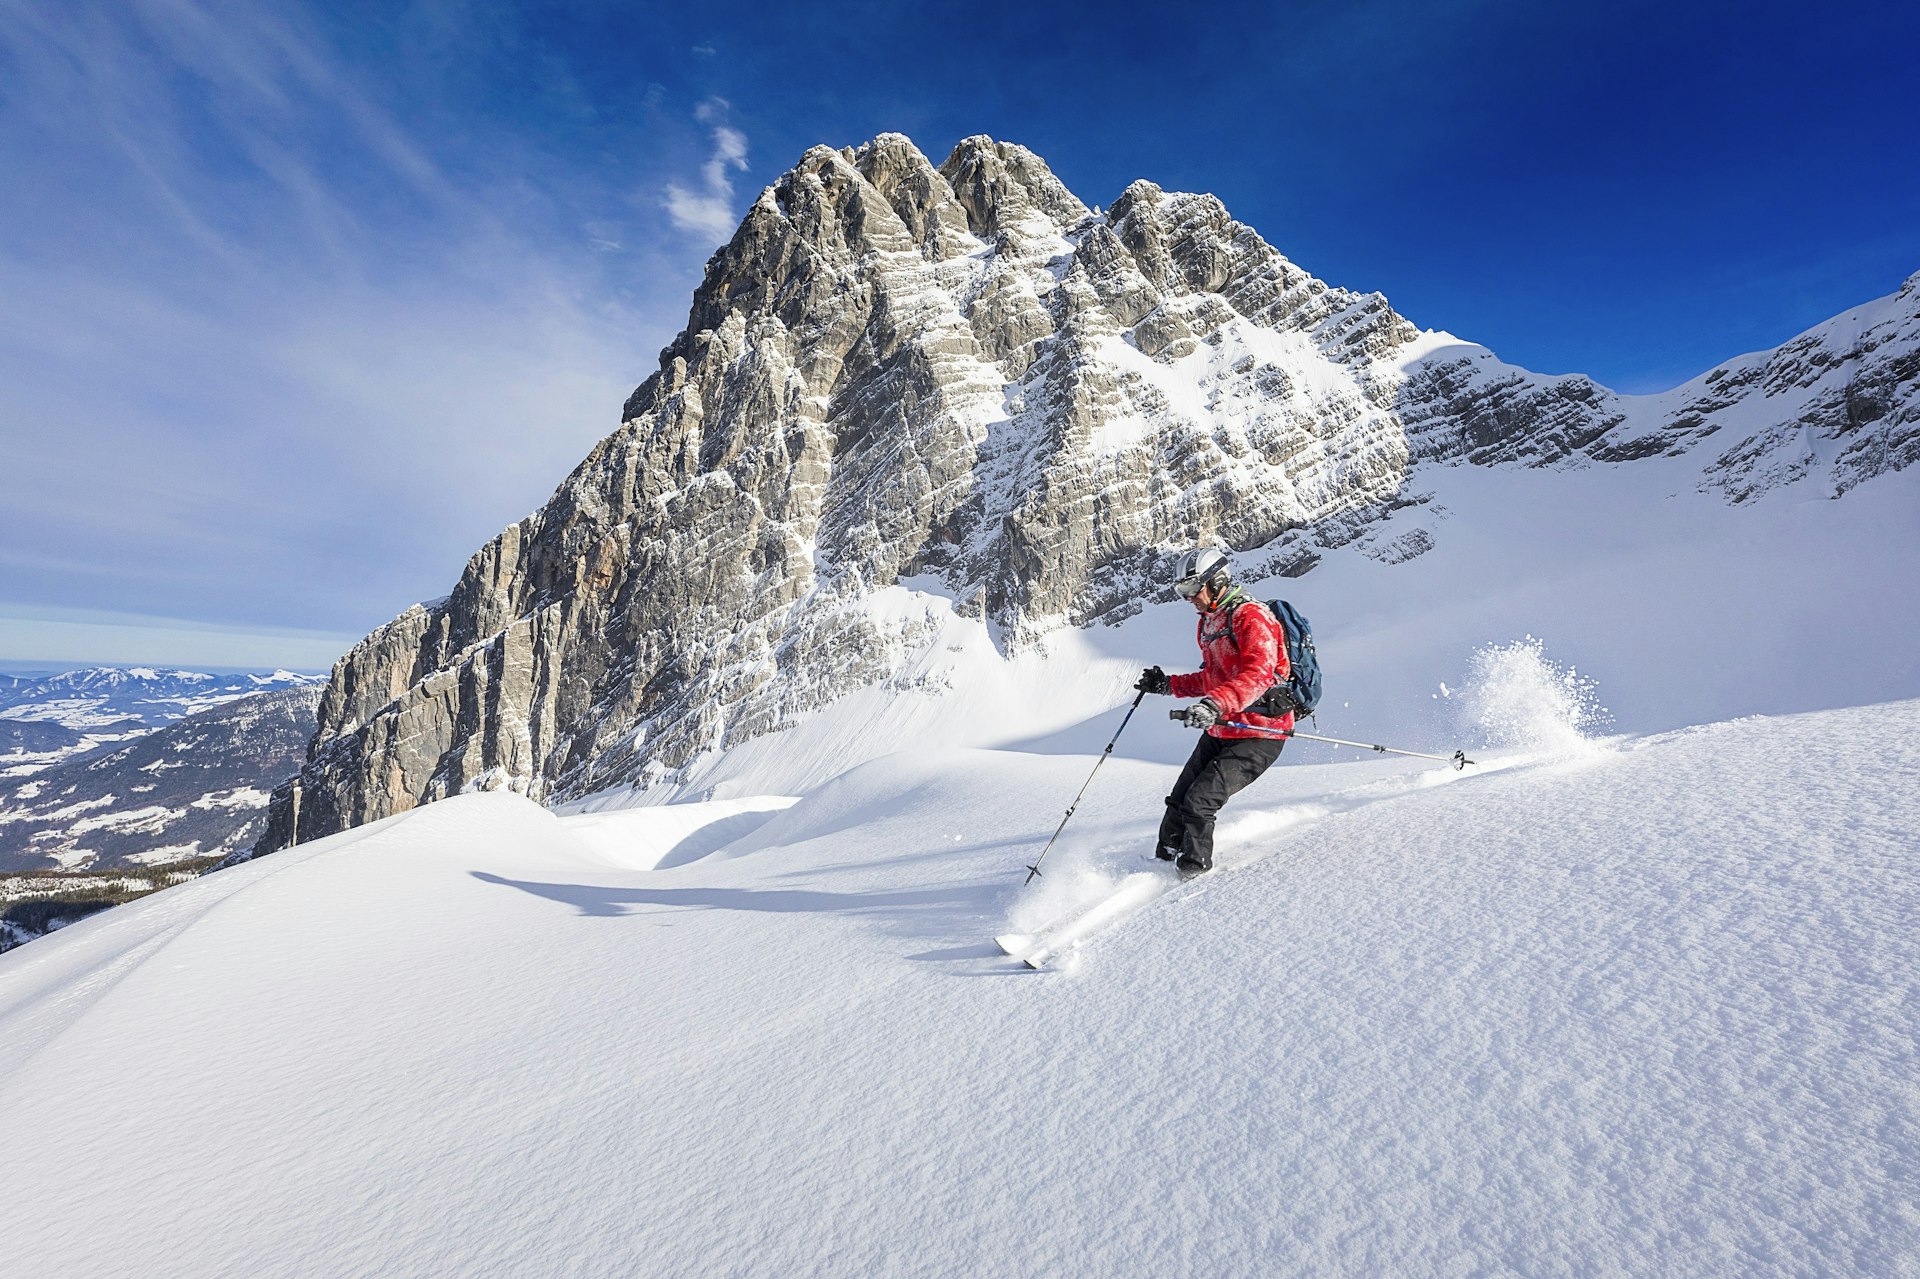 A man sking through powder in the back country of Berchtesgaden National Park; he's in a large track of virgin powder with a large pyramid rocky summit rising in the background.